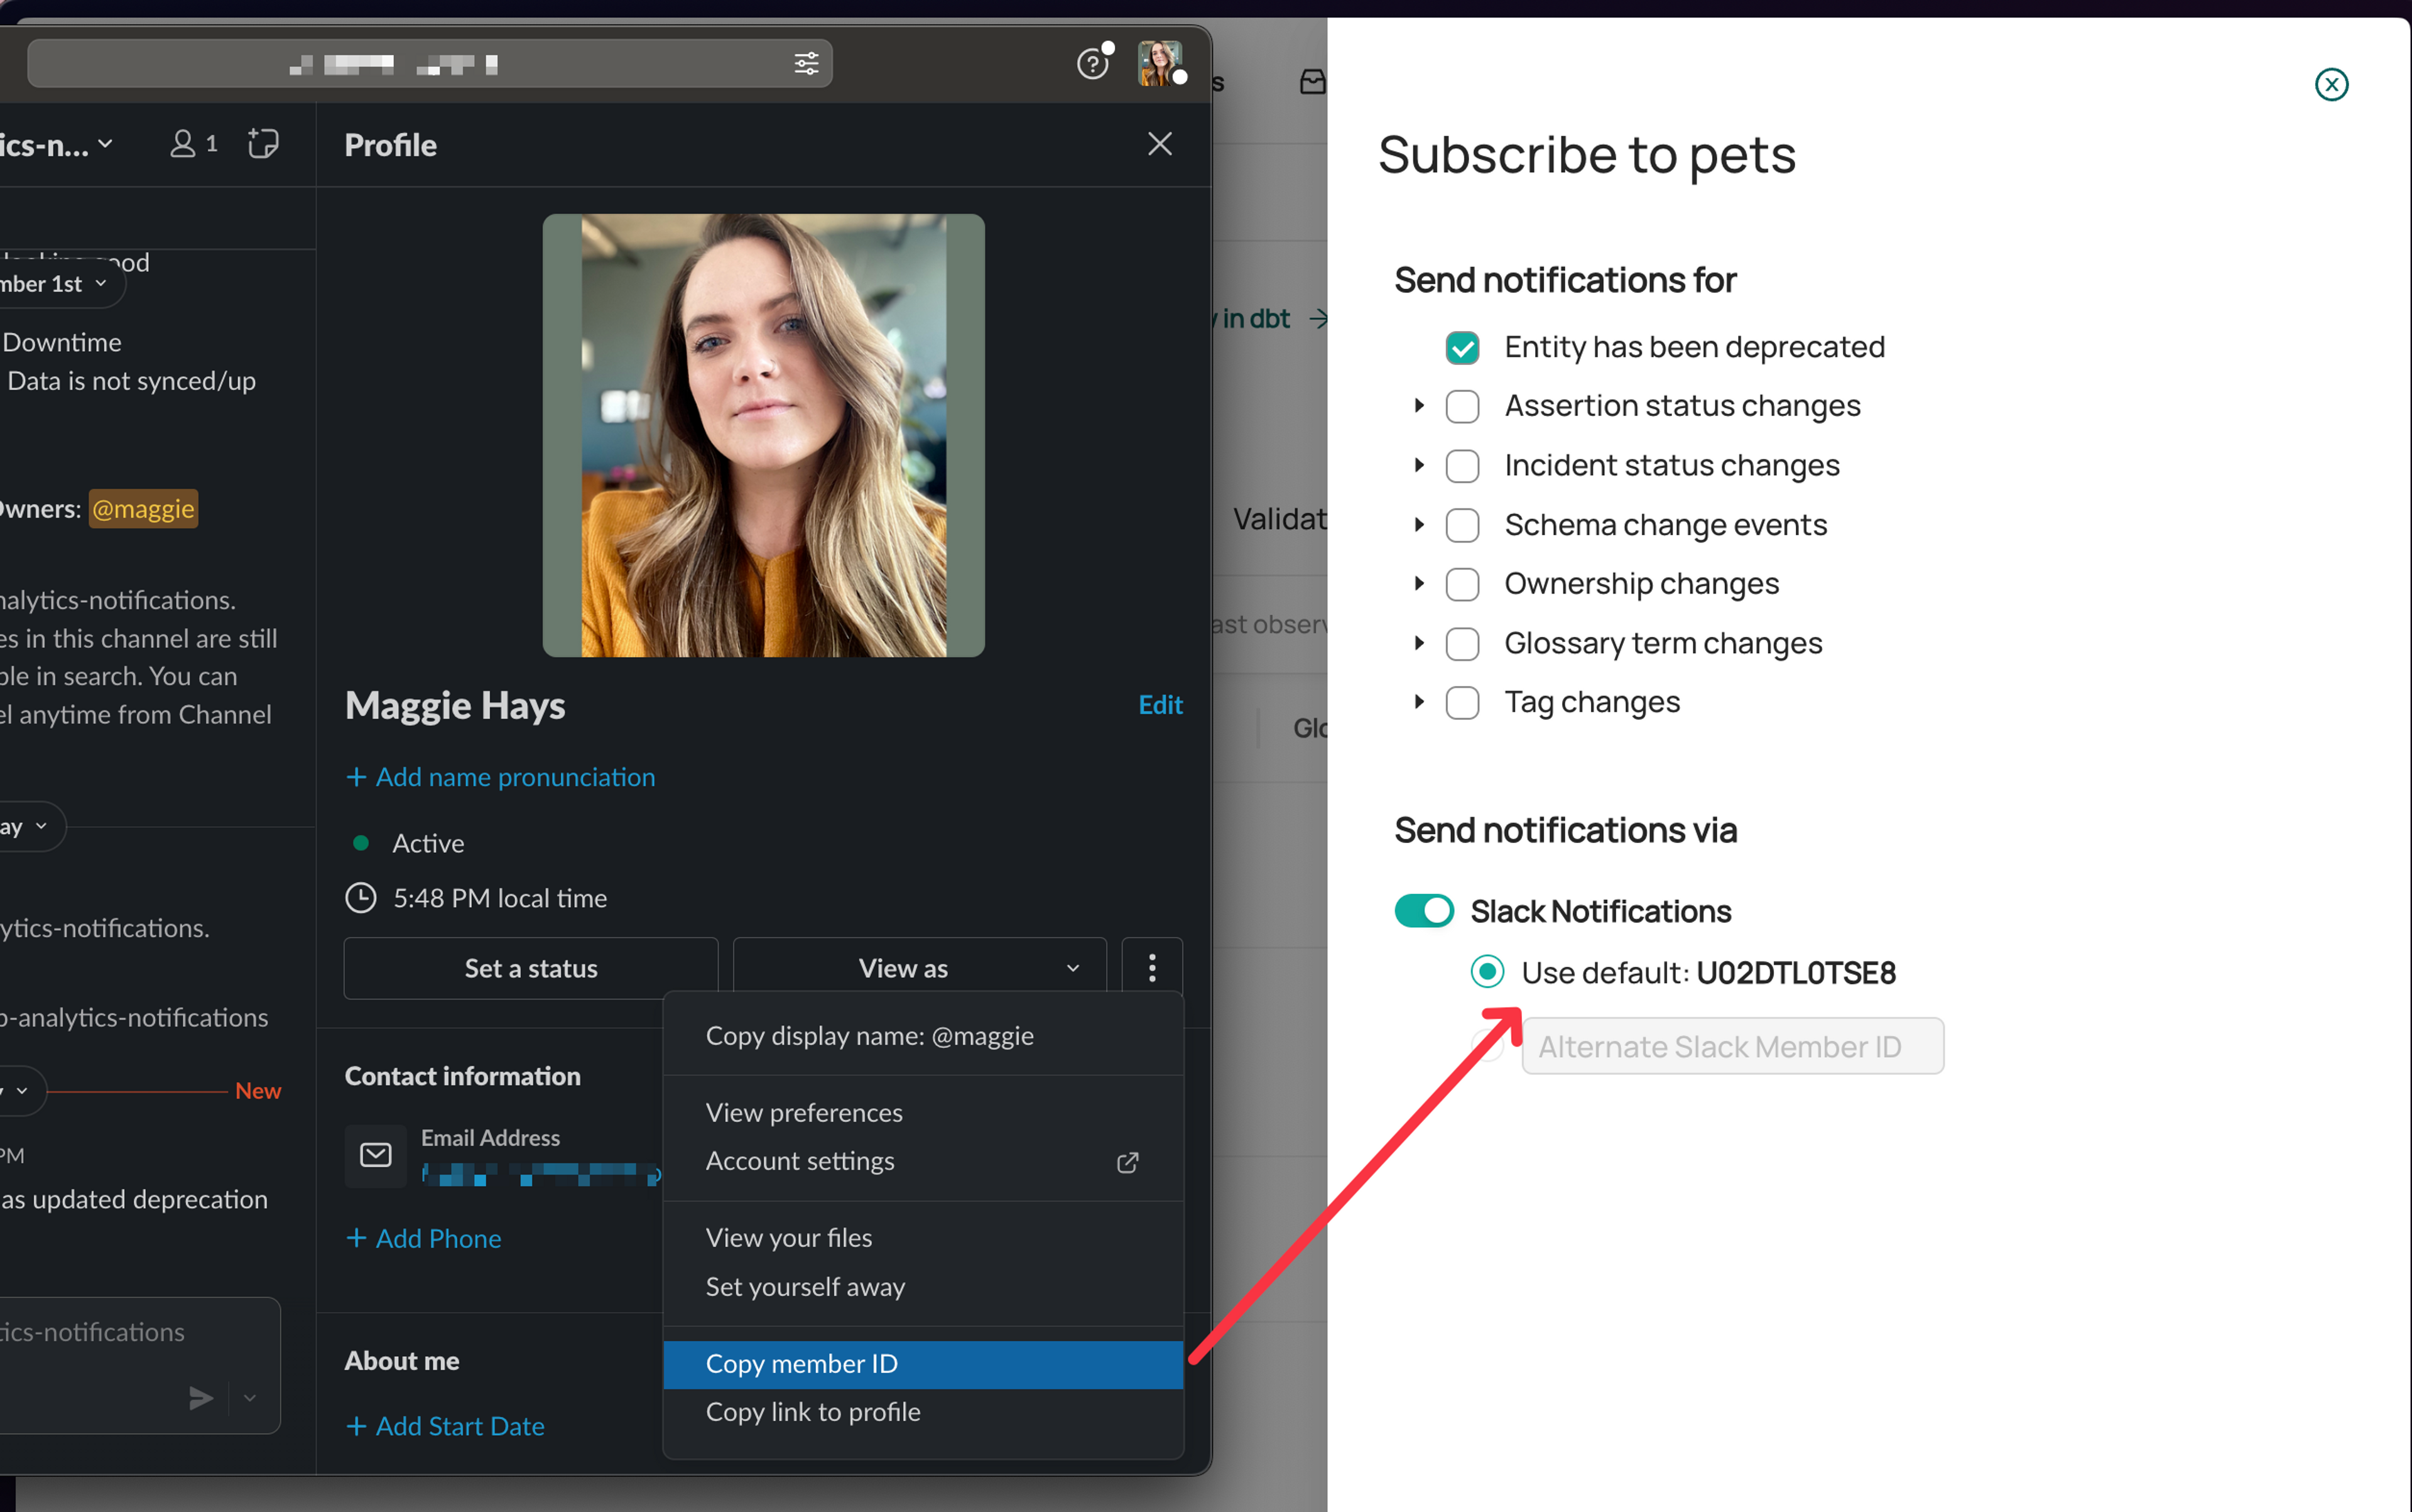 Subscription and Notifications - User can Set User ID